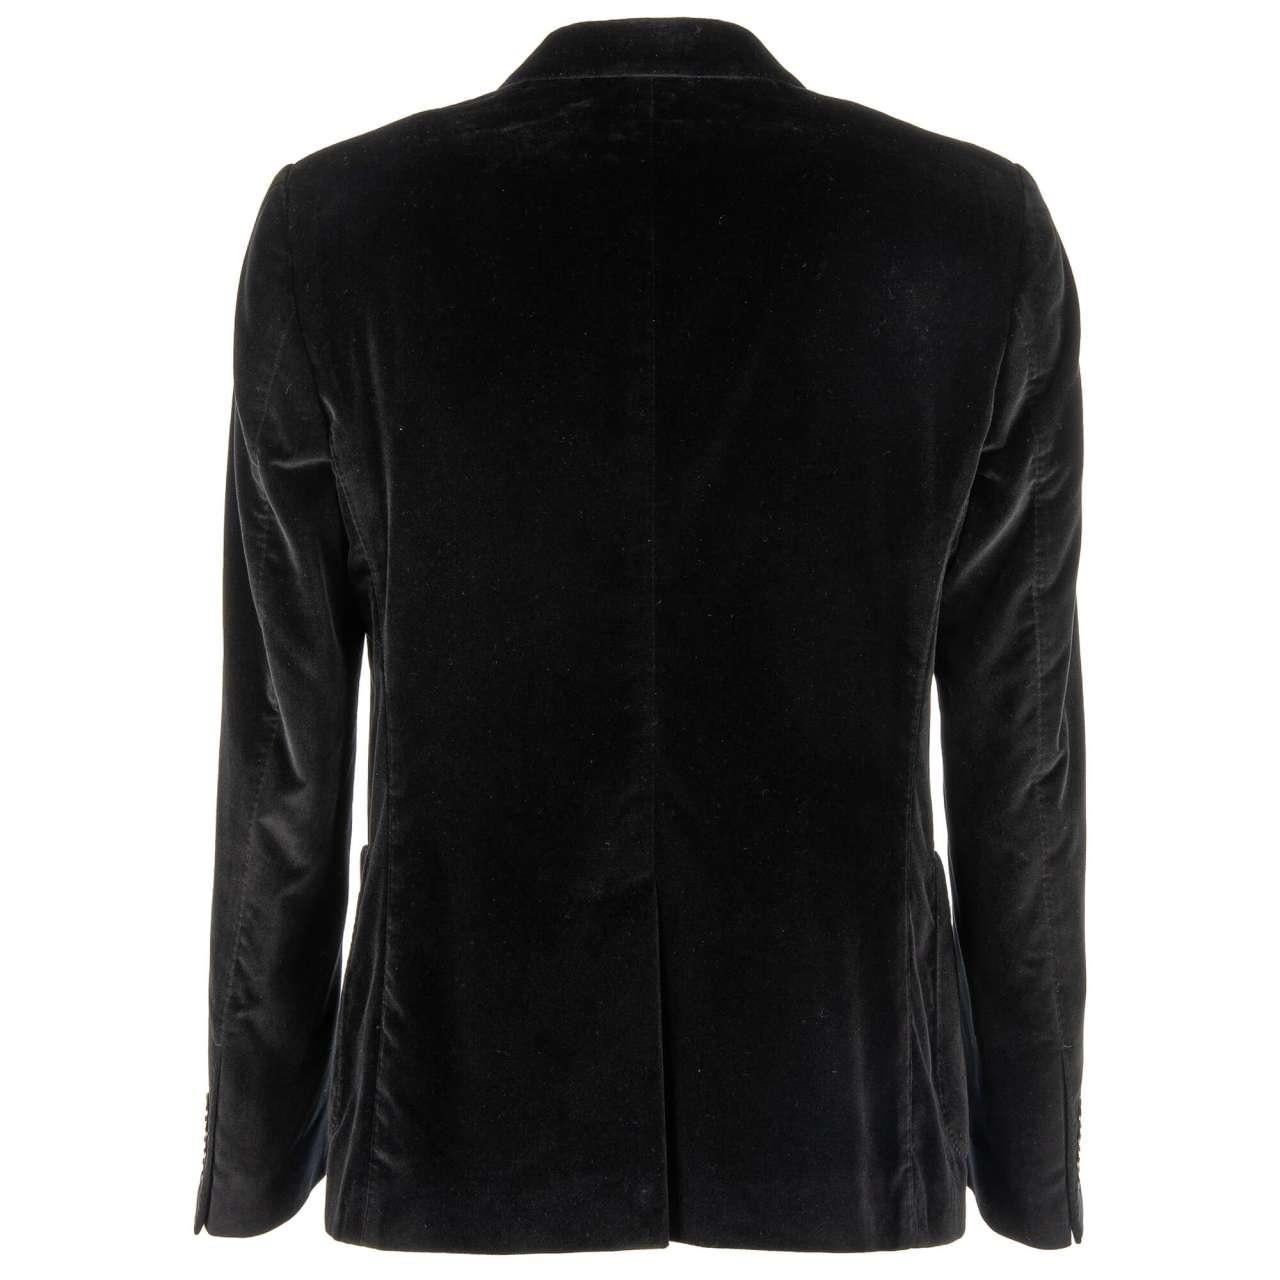 - Velvet blazer with inside crown logo embroidery, peak lapel and pockets in black by DOLCE & GABBANA - Former RRP: EUR 1,550 - Made In Italy - New with Tag - Slim Fit - Model: G2KN7Z-FUVG7-N0000 - Material: Velvet, 95% Cotton, 3% Polyester, 2% Silk